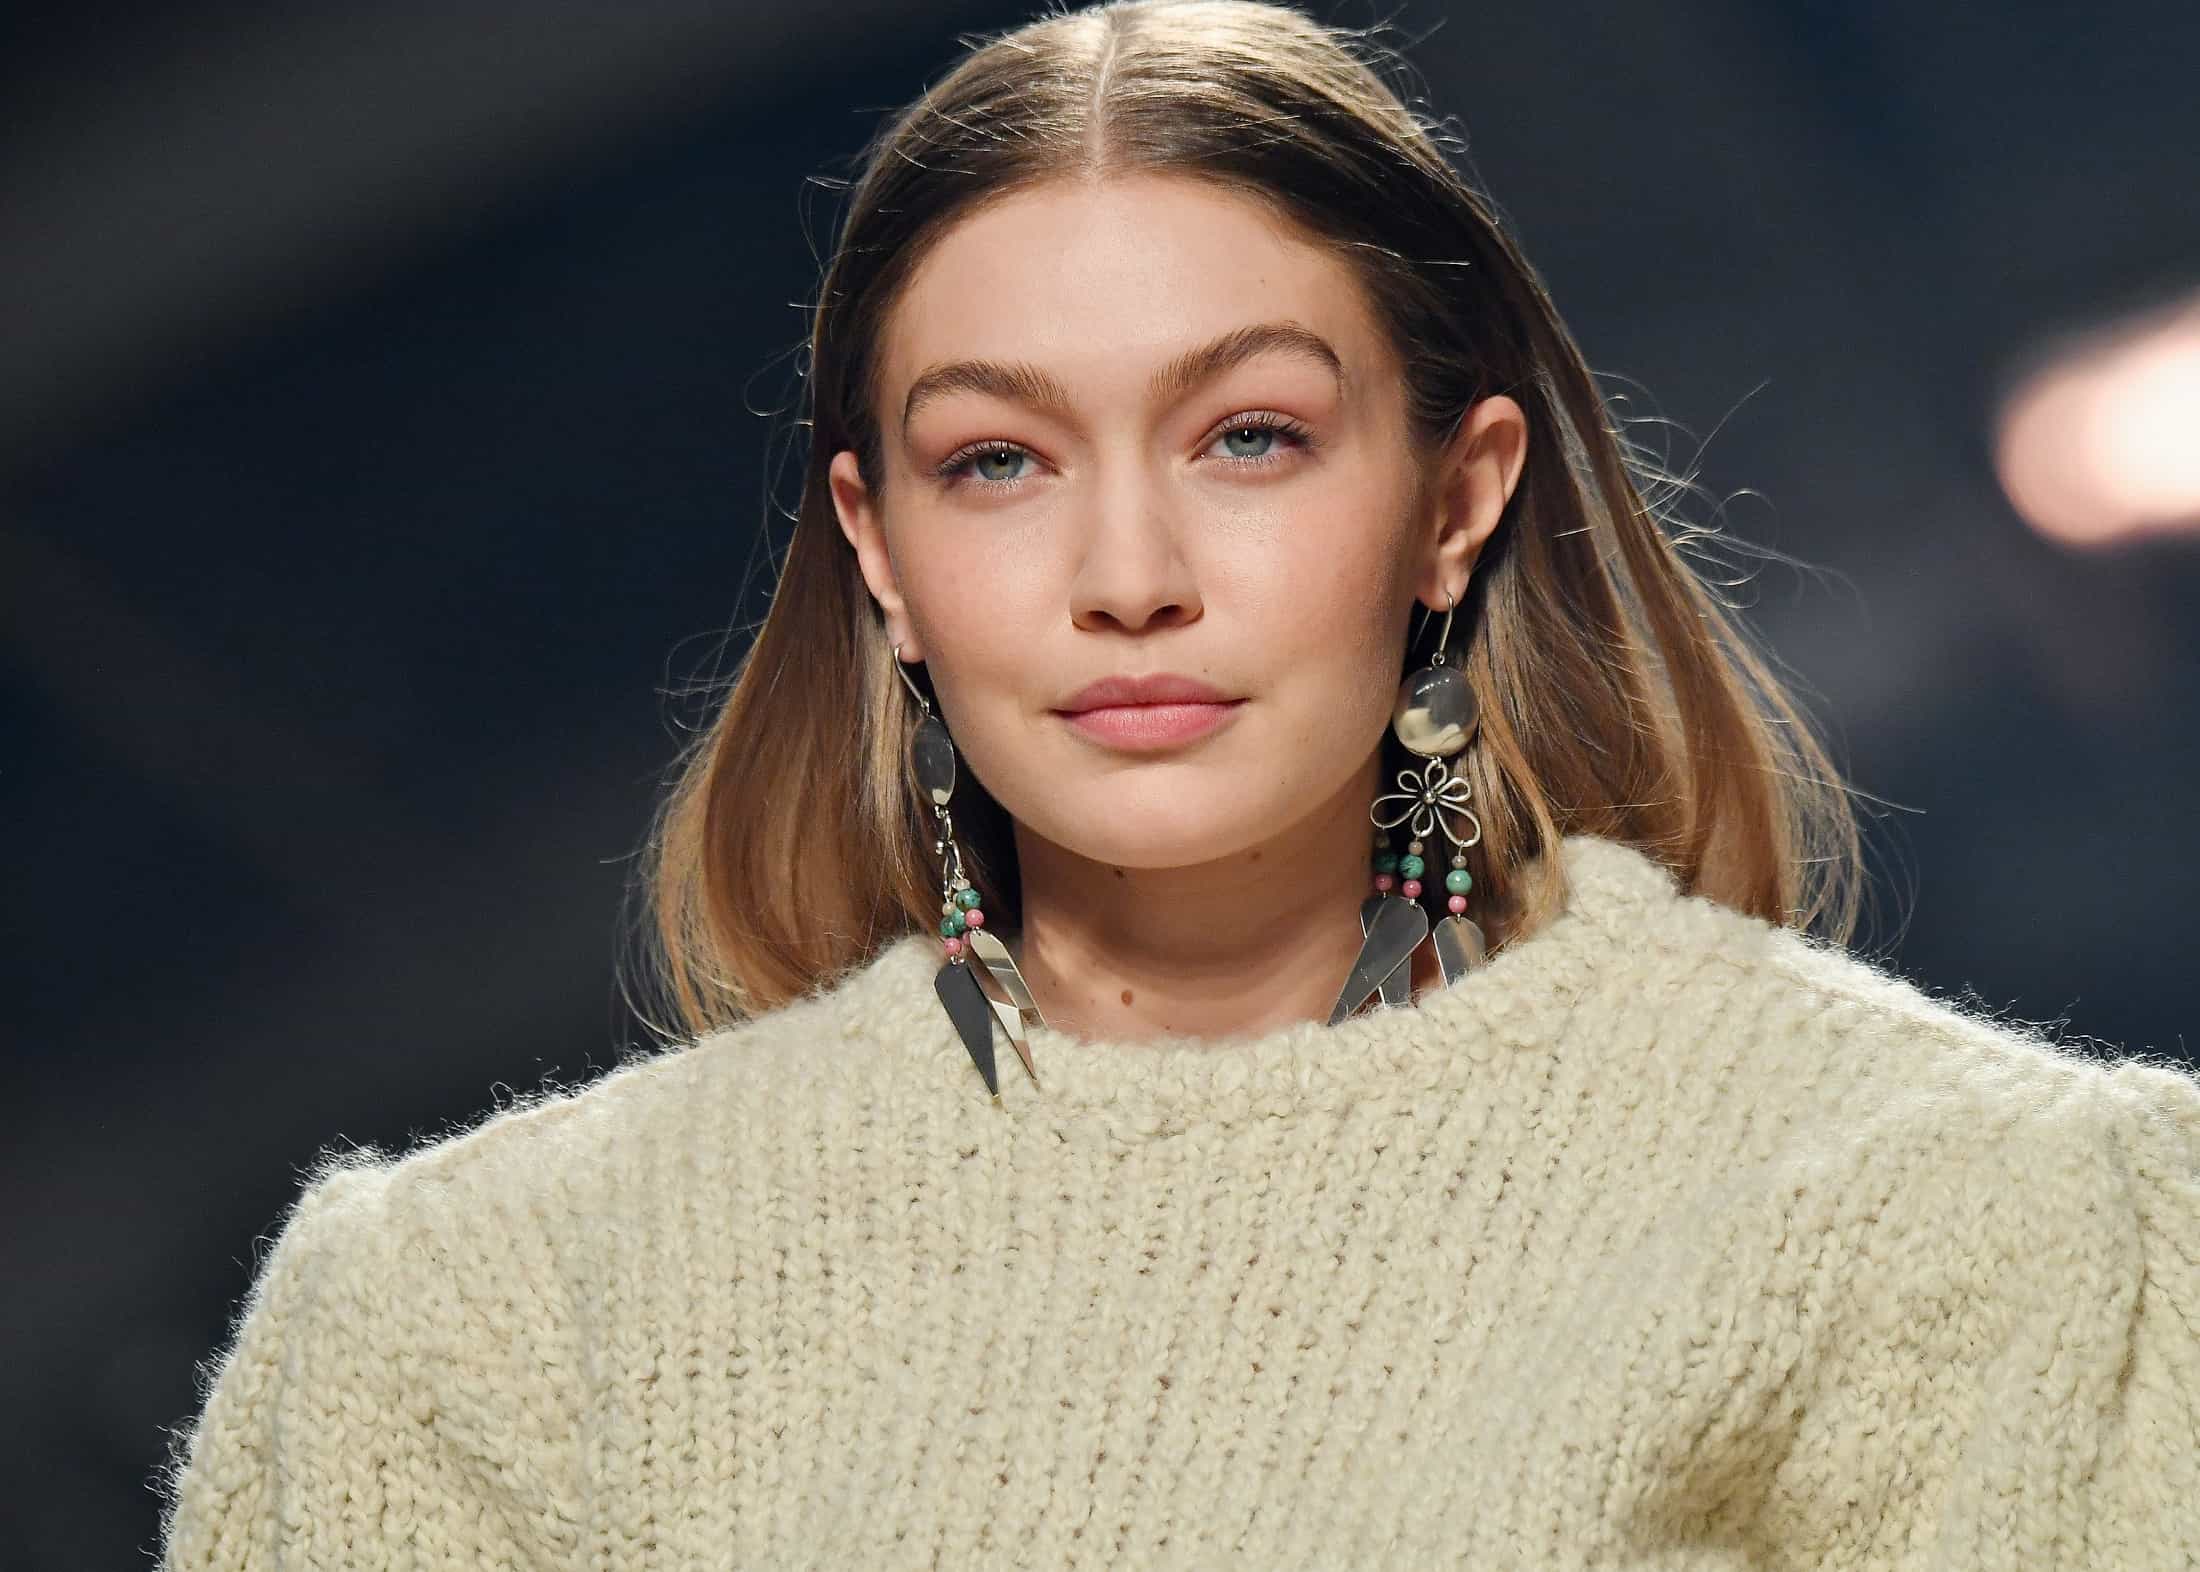 What has Gigi Hadid taught us about fashion?